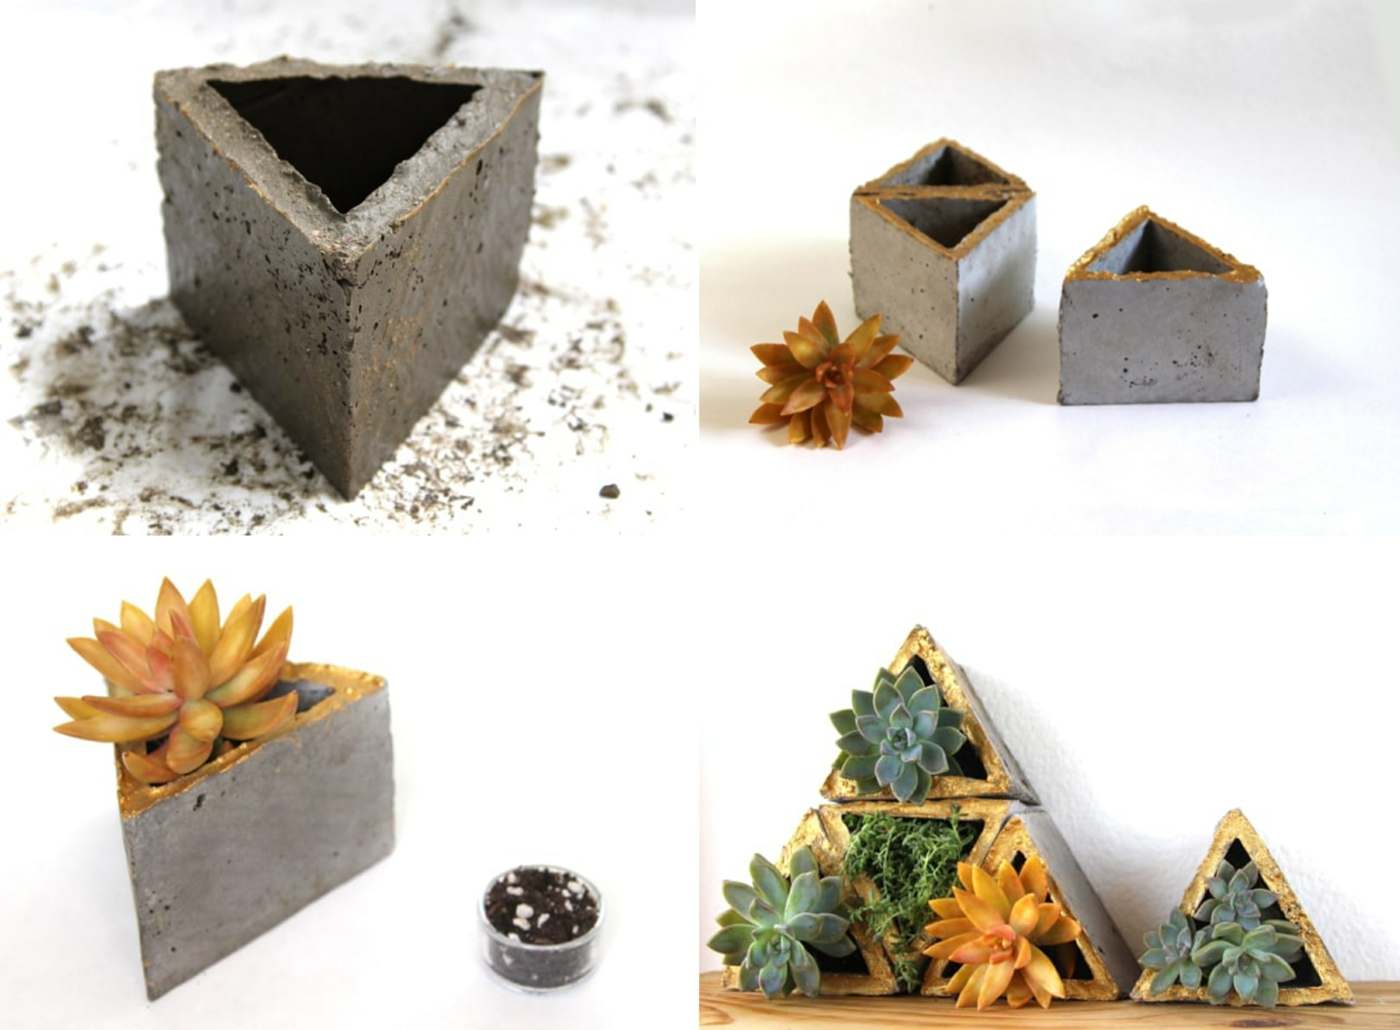 Assemble vertical gardens with small pyramids with succulents